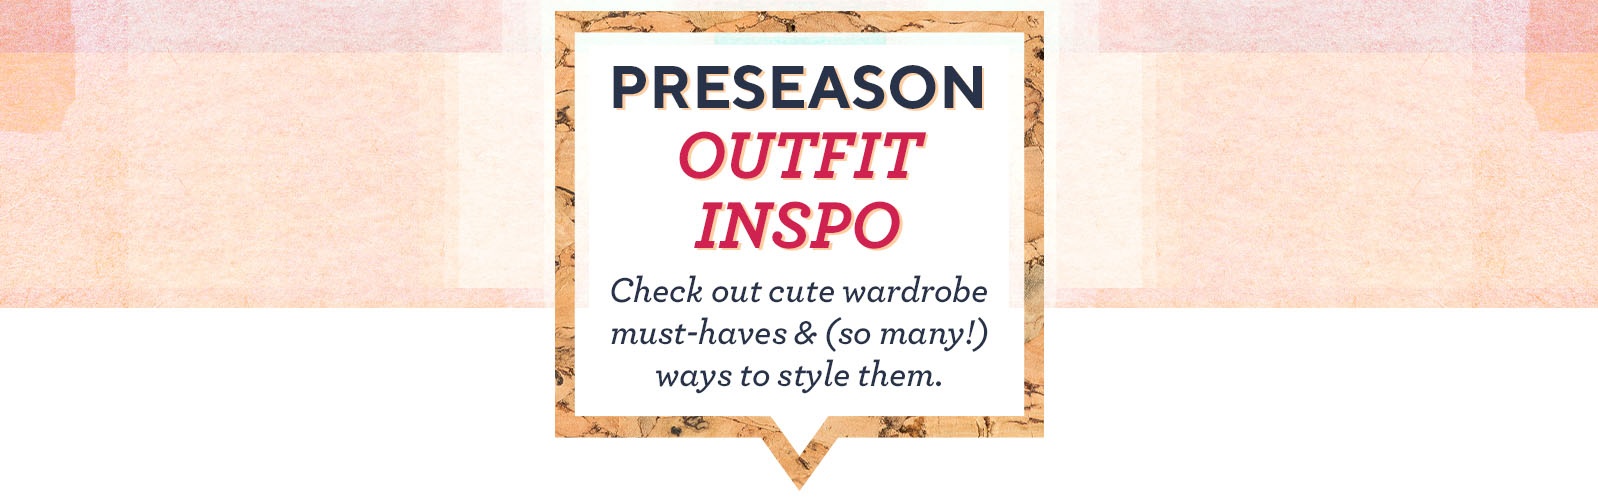 Preseason Outfit Inspo: Check out cute wardrobe must-haves & (so many!) ways to style them.